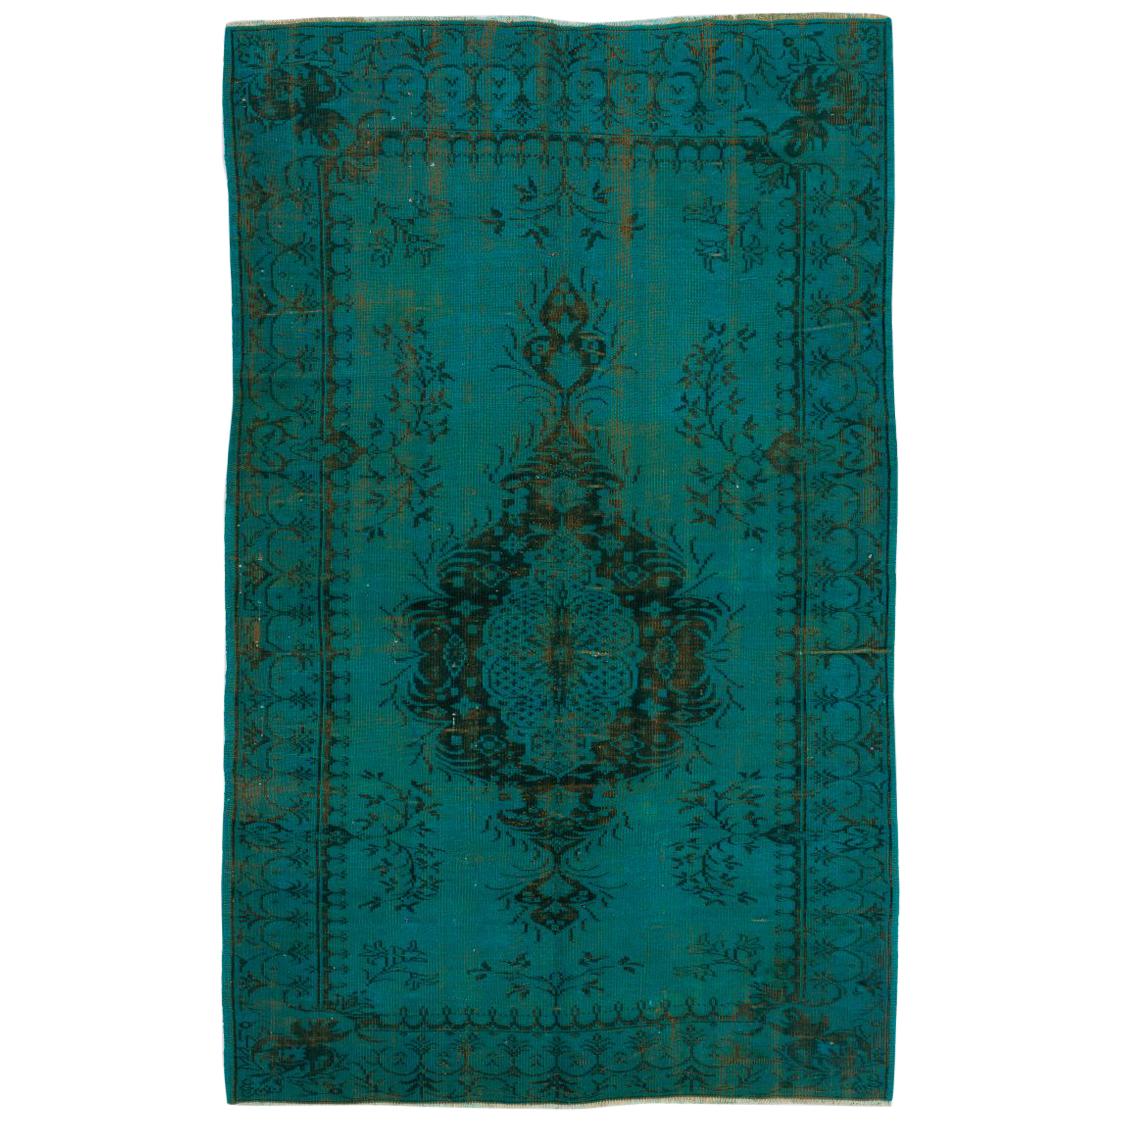 5.8x9.3 Ft Vintage Hand-knotted Turkish Wool Medallion Rug Over-dyed in Teal